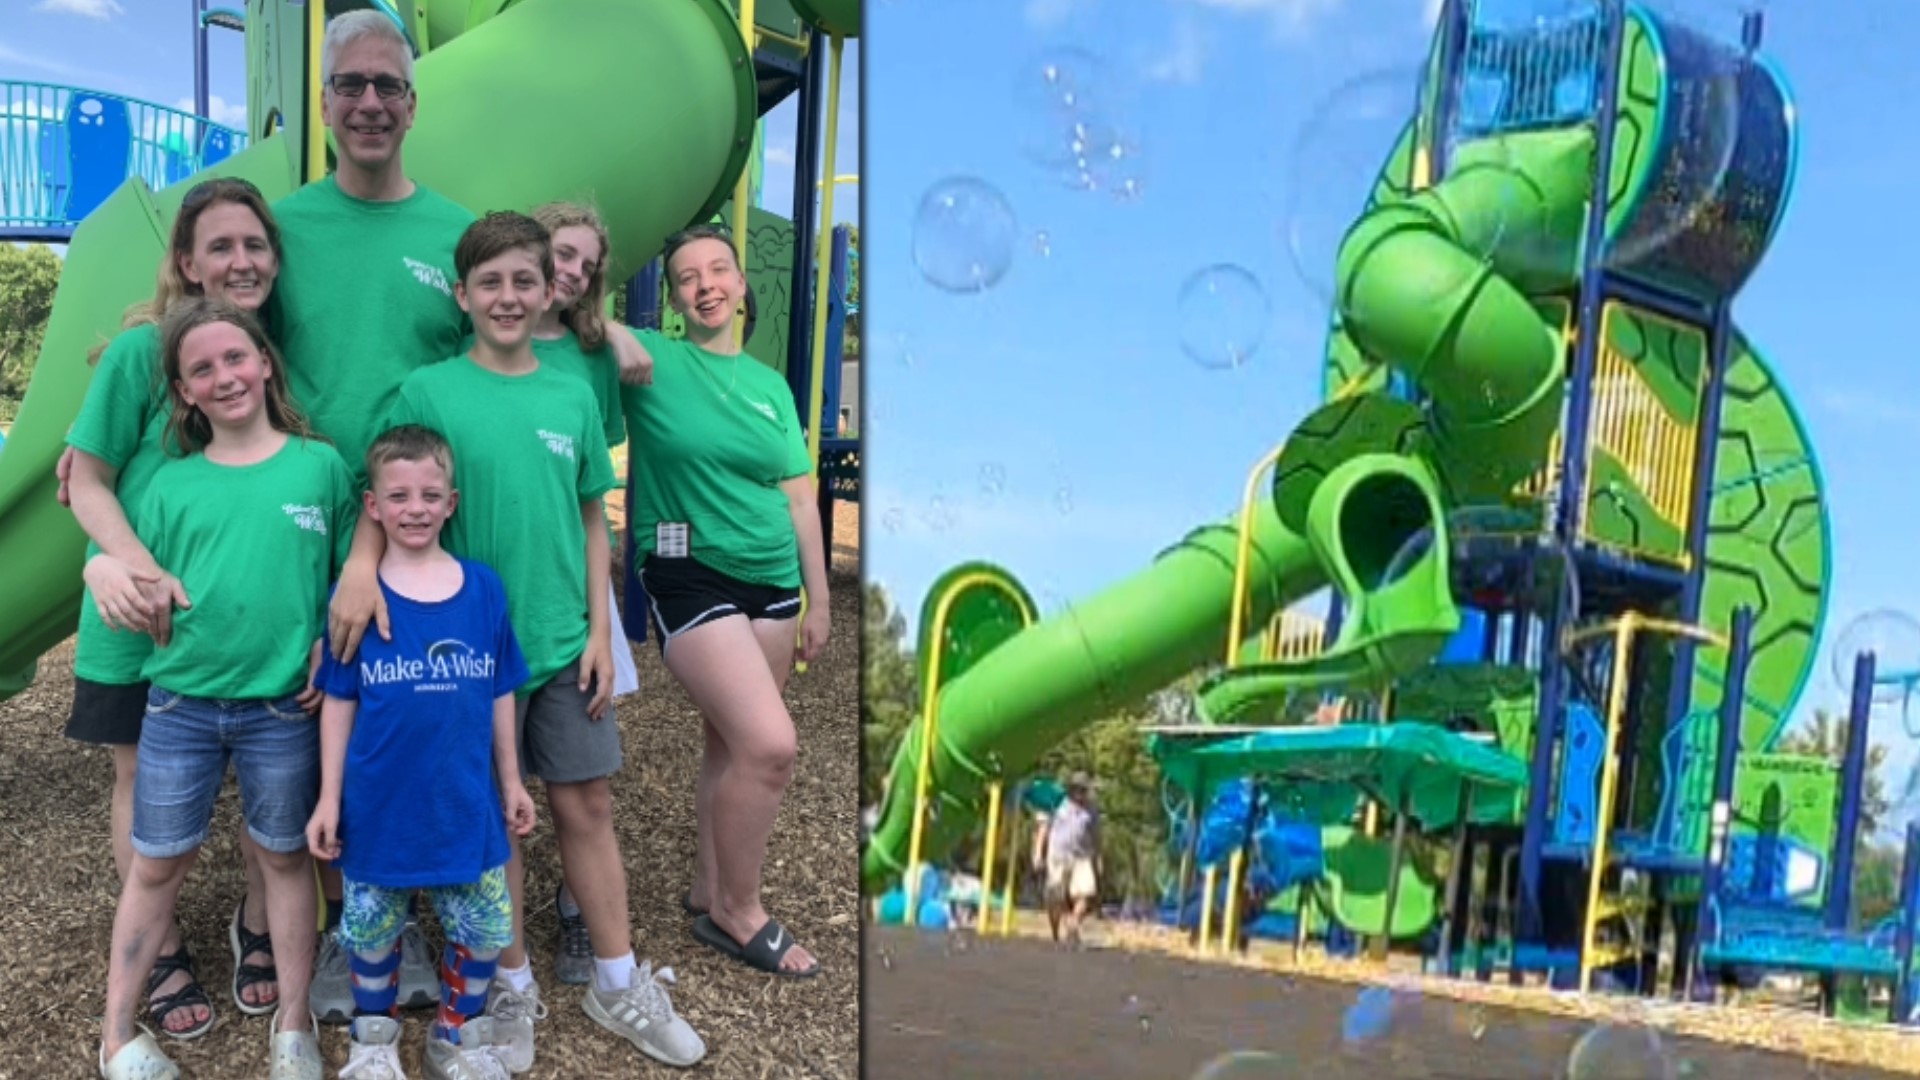 On Grant Loven's 6th birthday, community members revealed a brand new playground at Bloomington Living Hope Lutheran School.